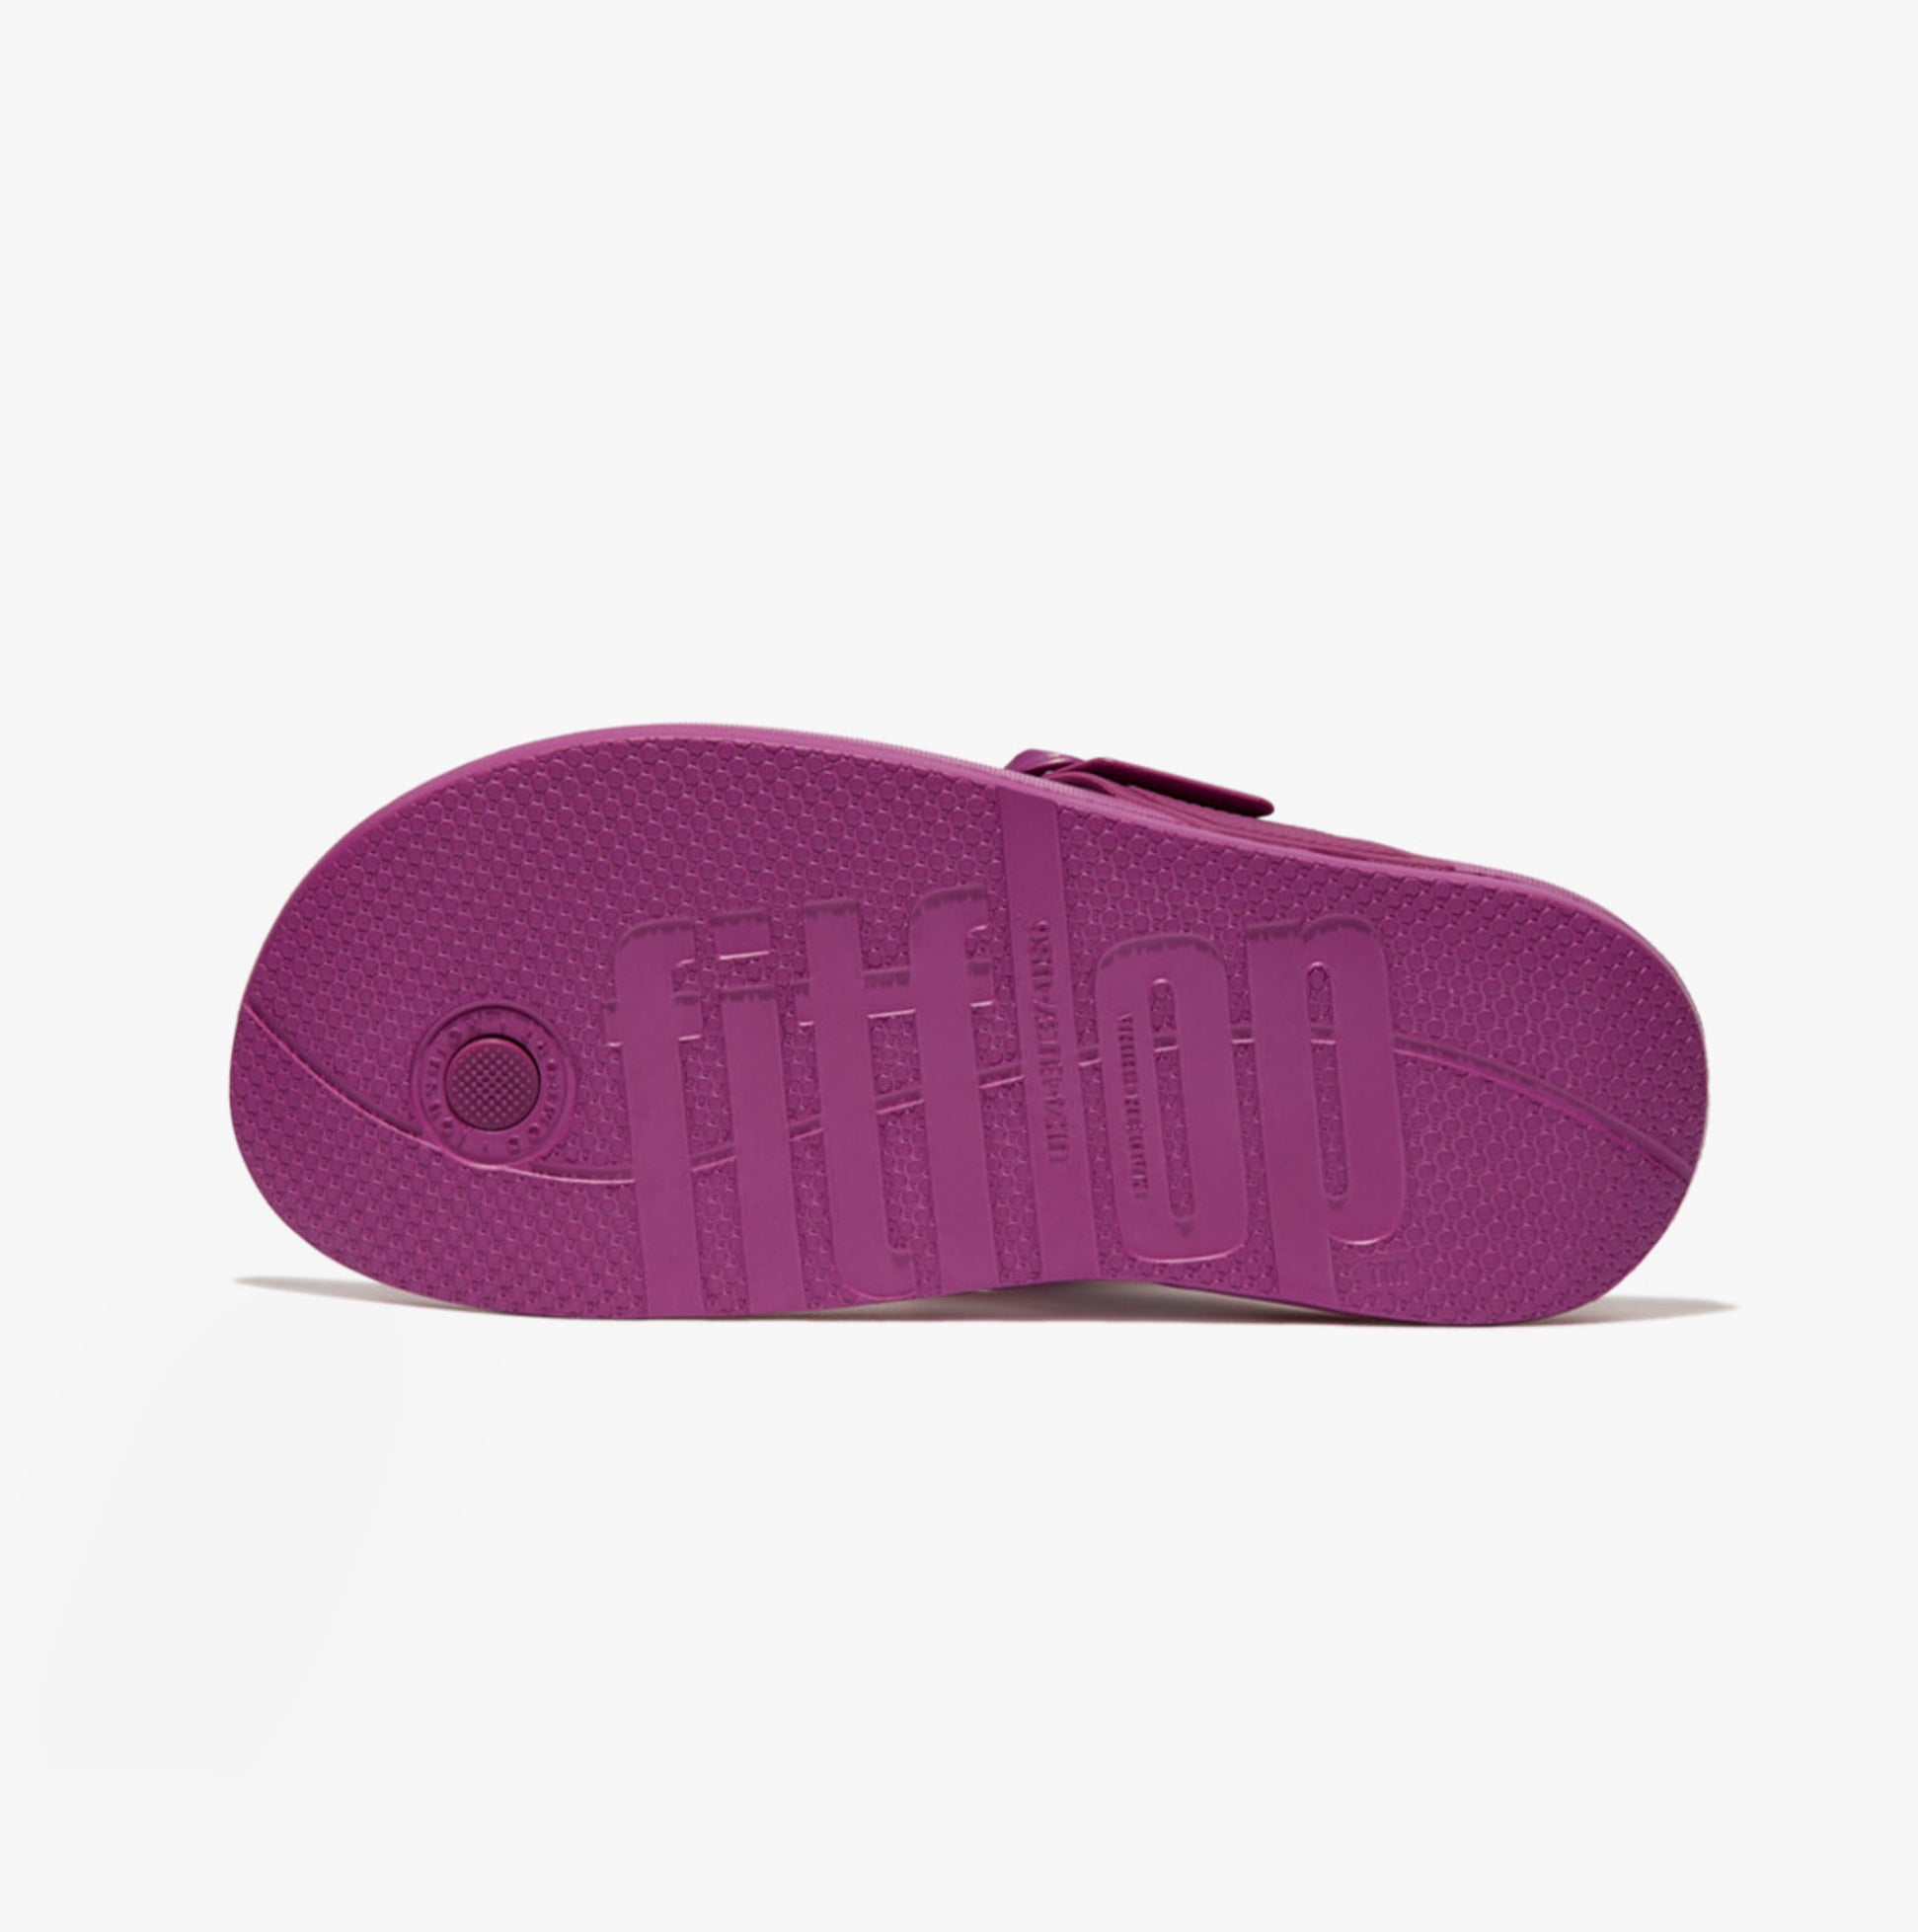 FitFlop-[GB3-A29]-MiamiViolet-6.jpg